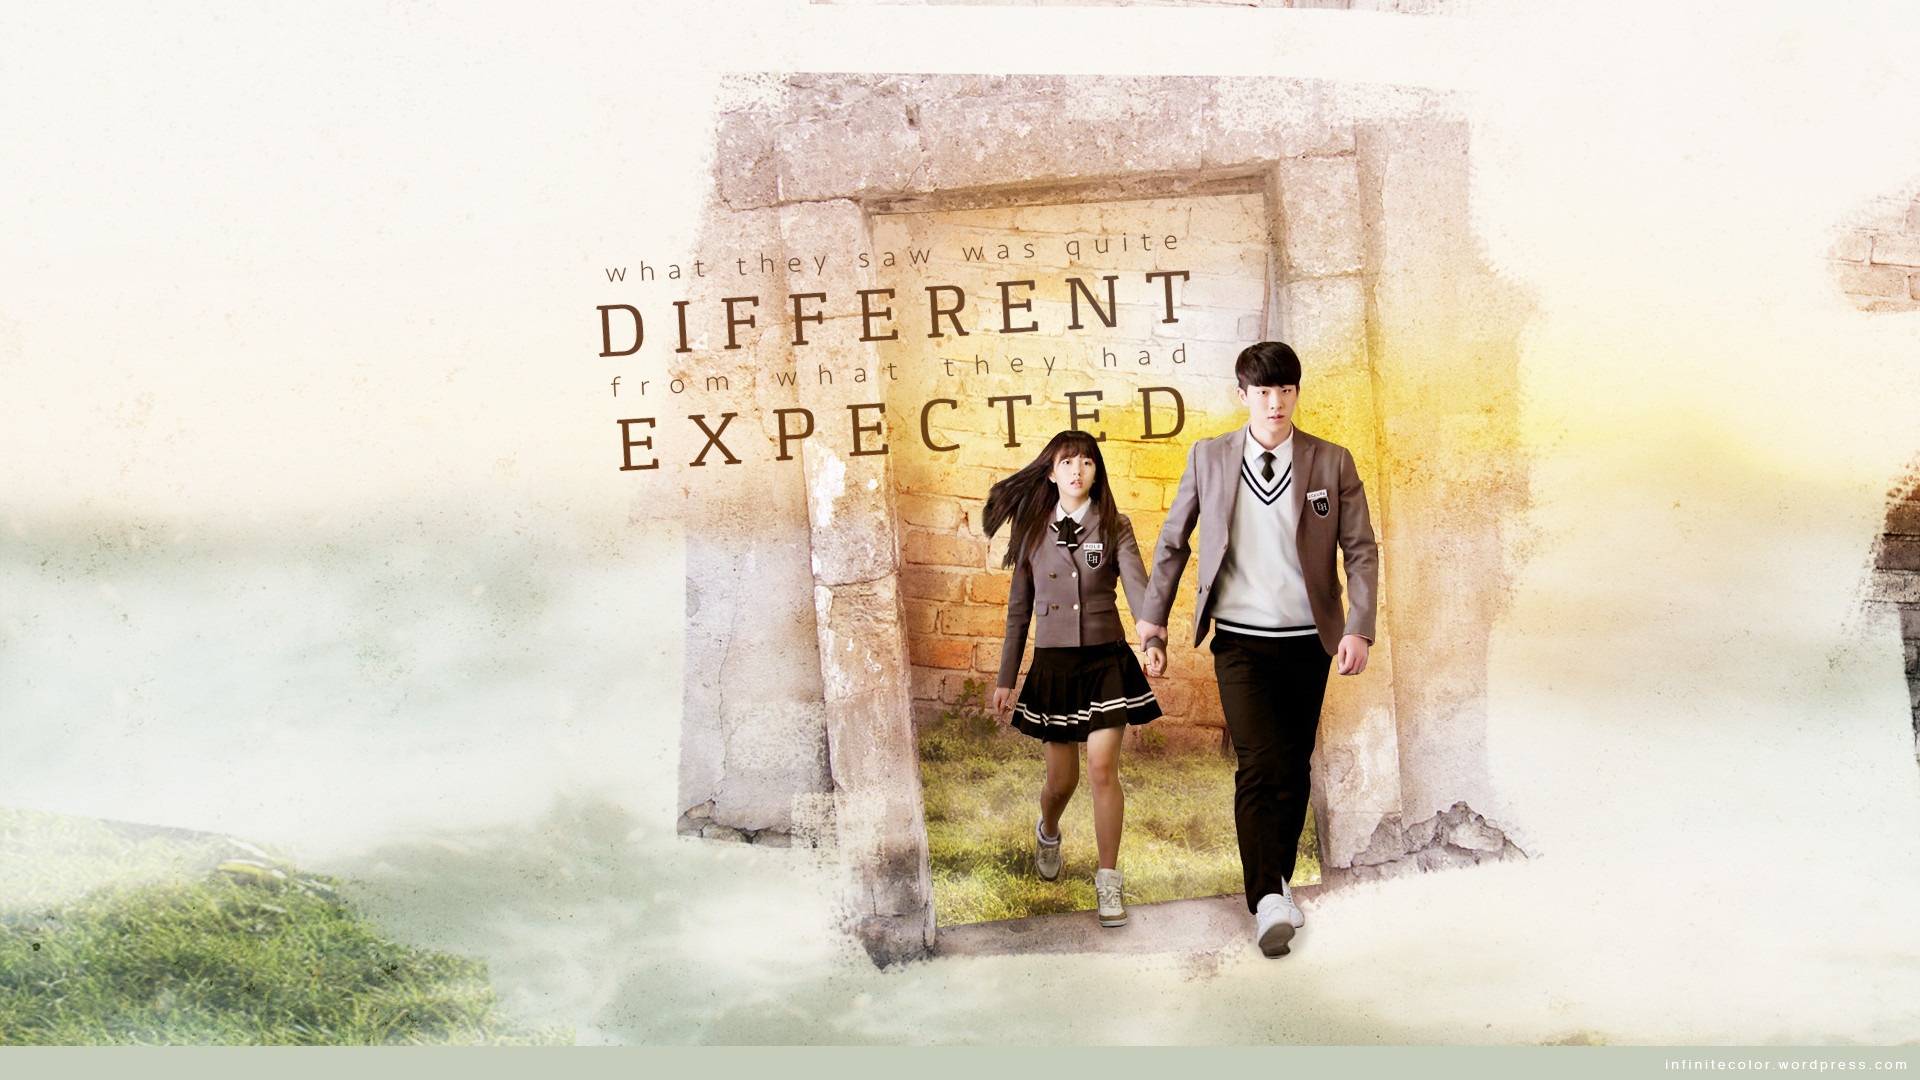 1920x1080 Here is a wallpaper inspired by Eustace and Jill's entrance into Narnia.  #thesilverchair #narnia #wallpaper #School2015 #KimSoHyun